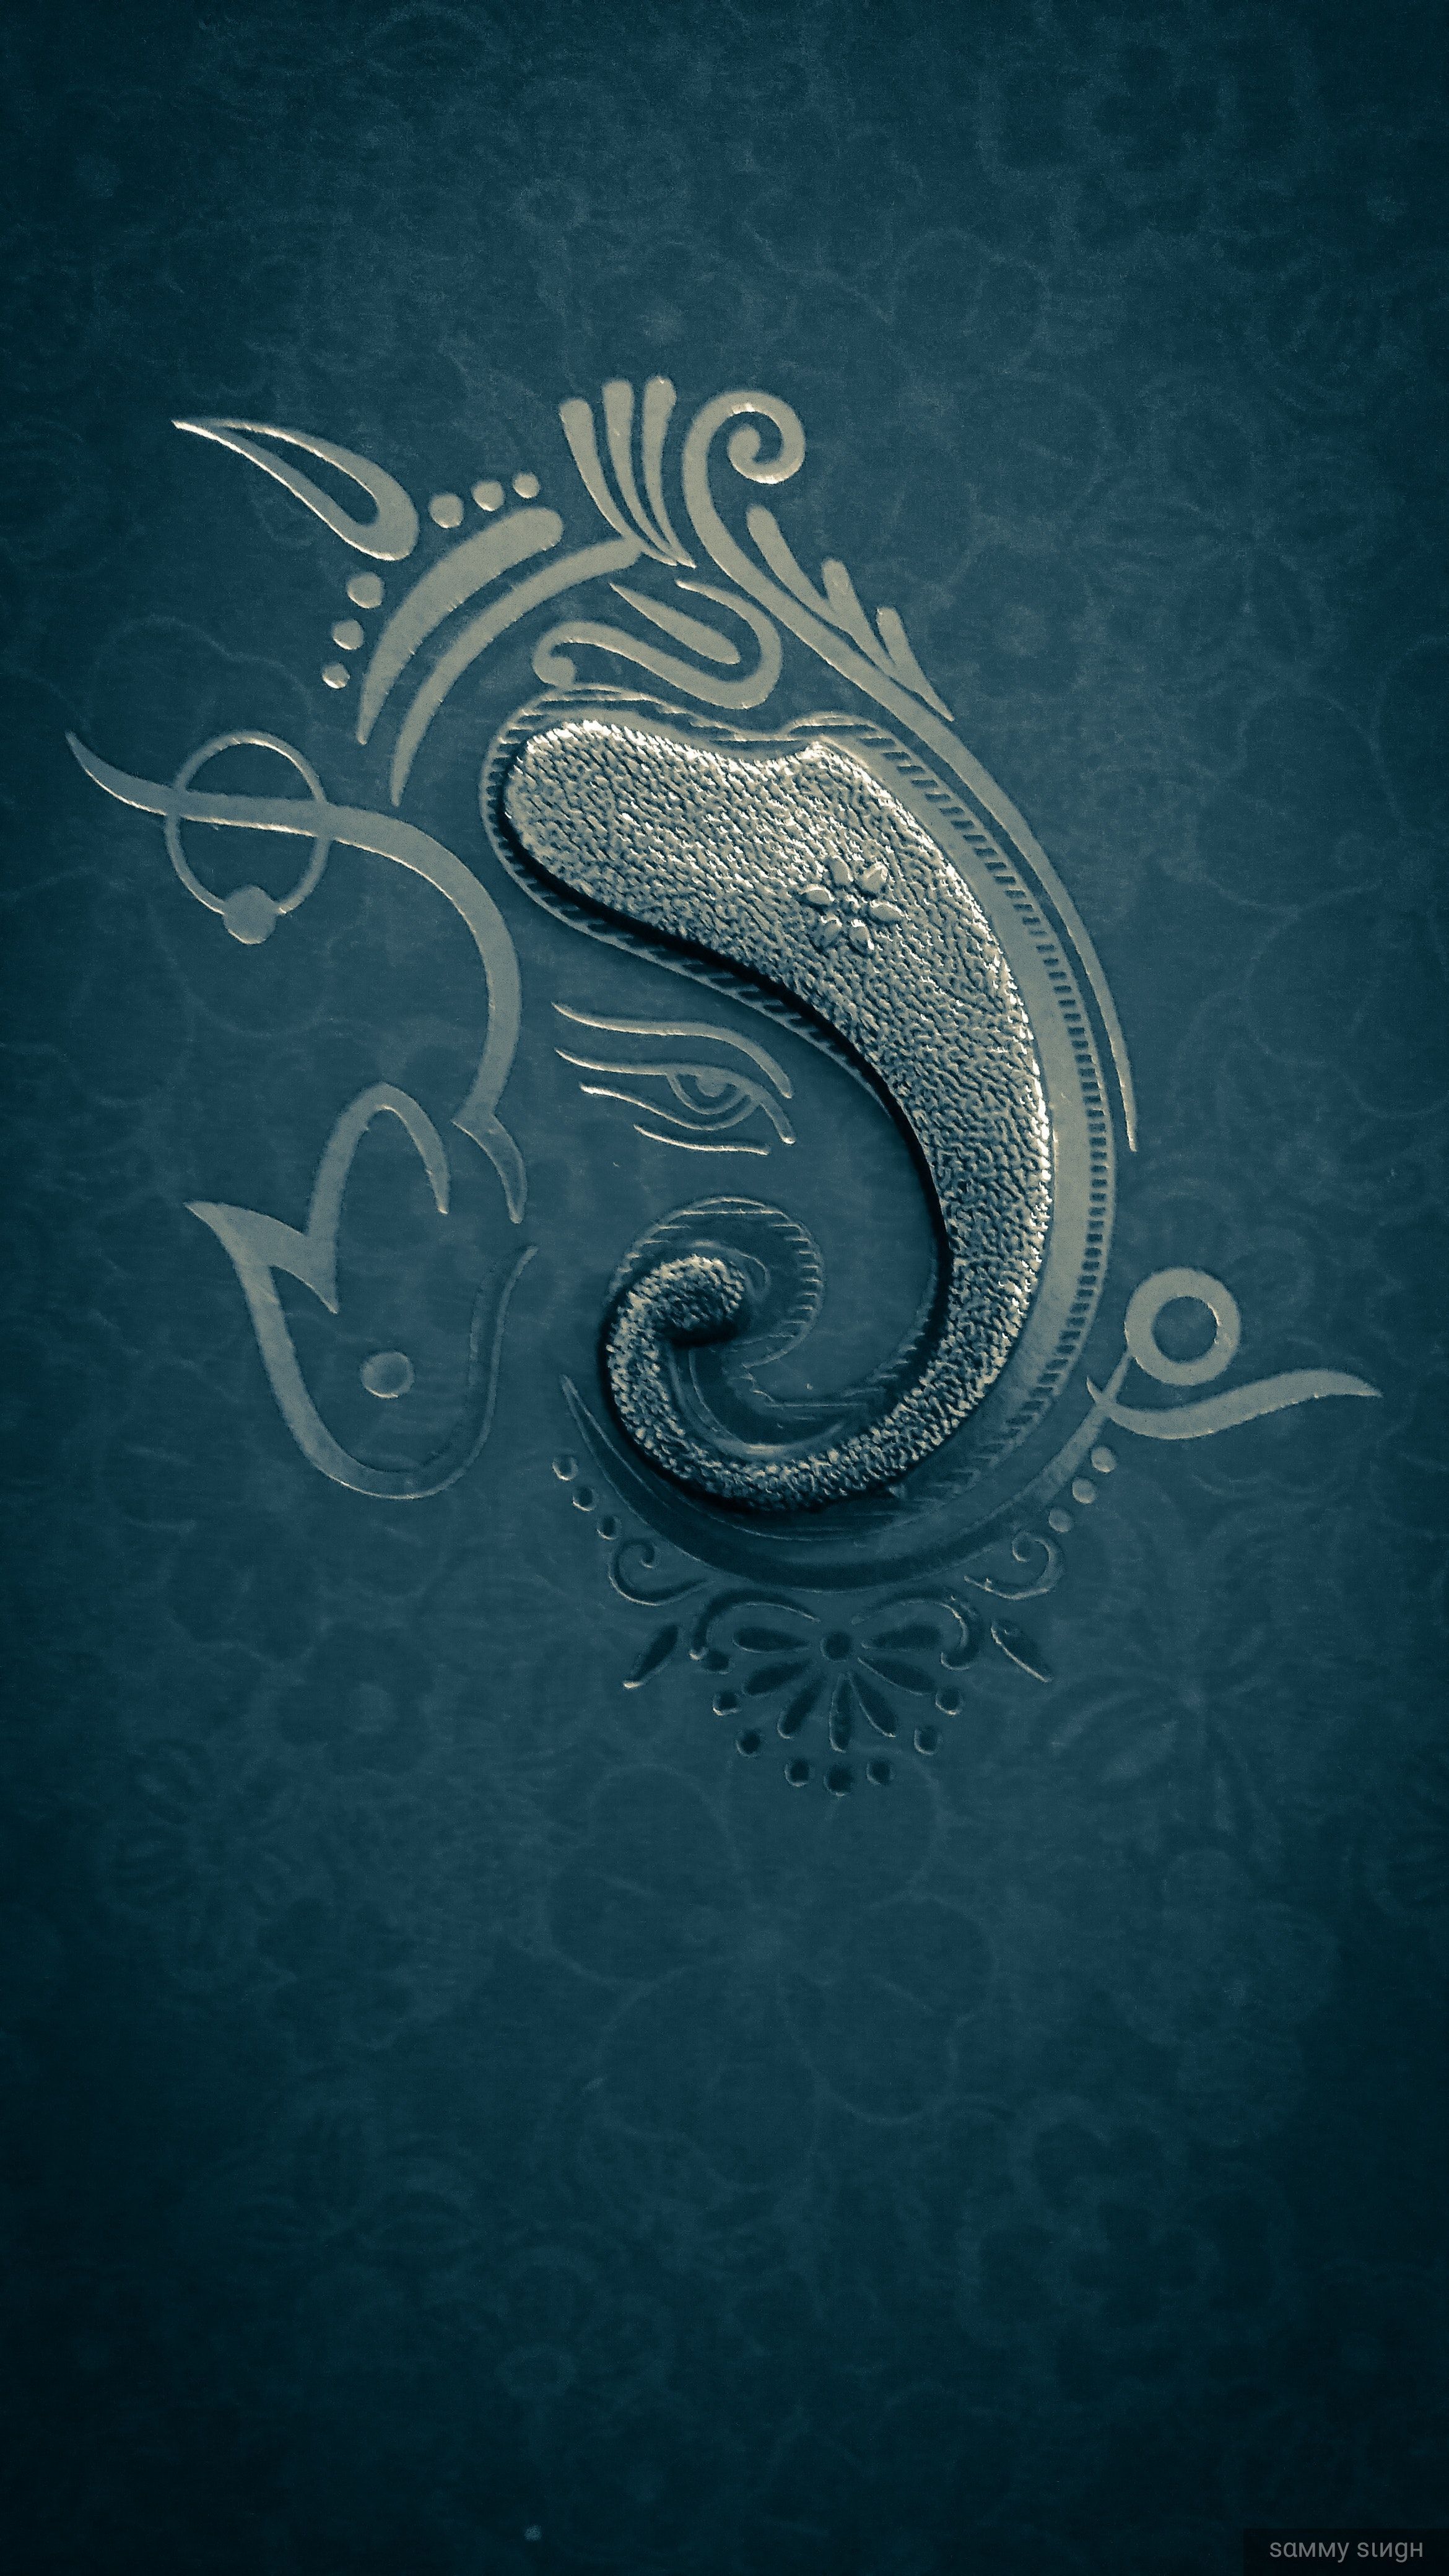 Ganesh wallpaper by ramxmhr - Download on ZEDGE™ | bfca